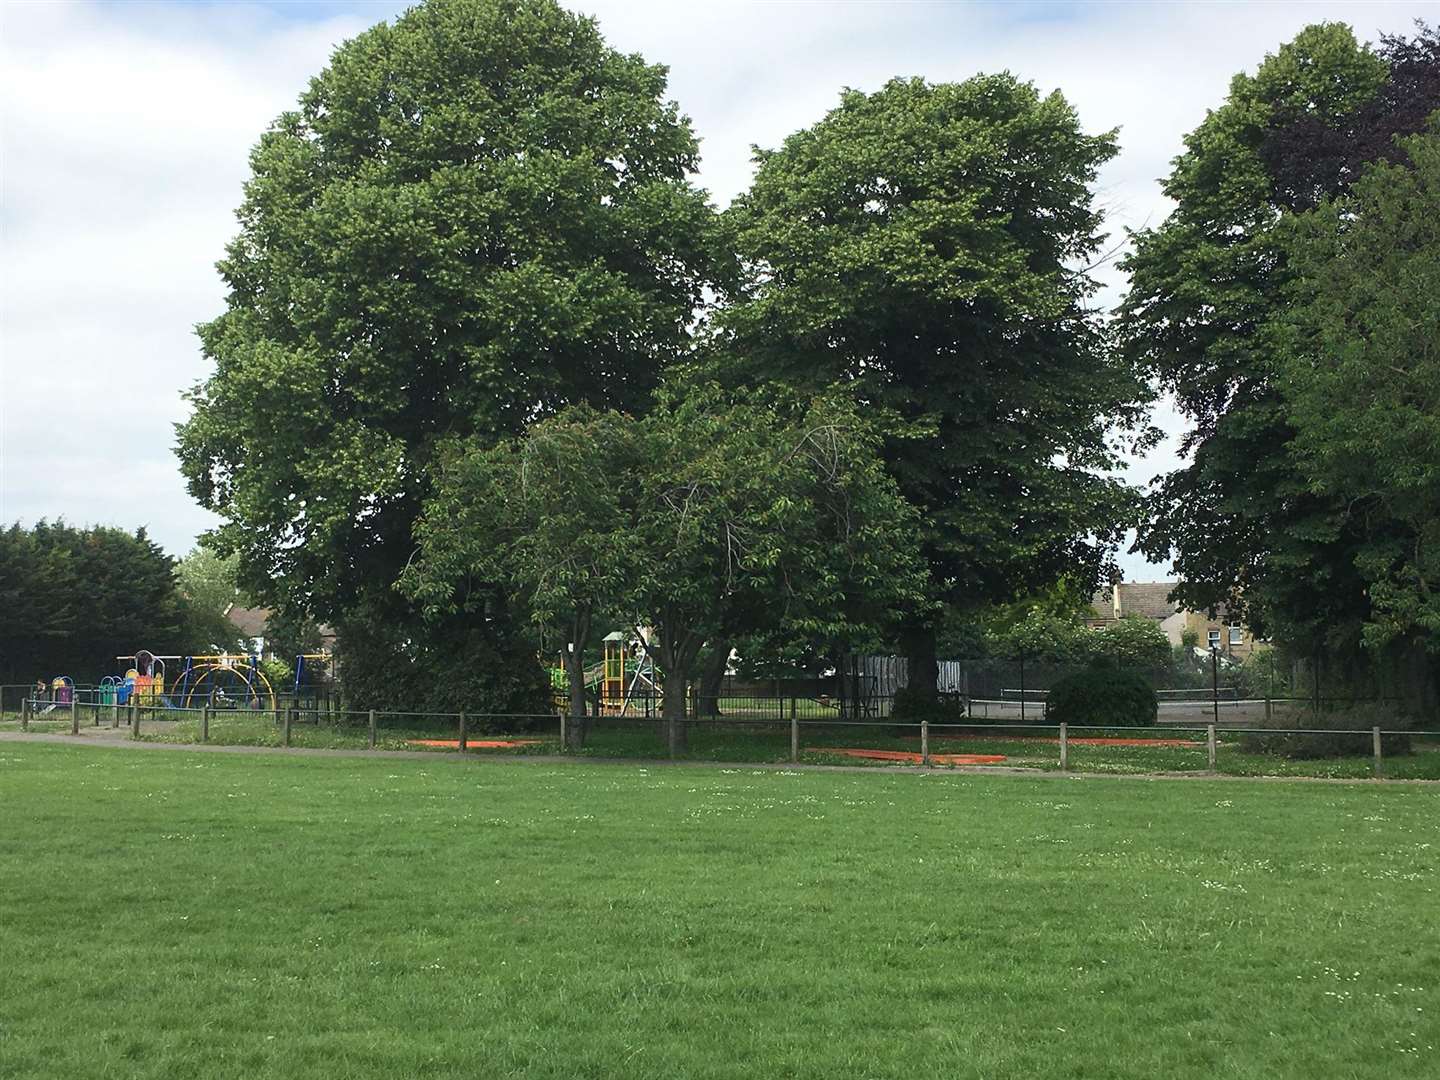 An appeal for witnesses has been made following the incident at Woodlands Park, Gravesend